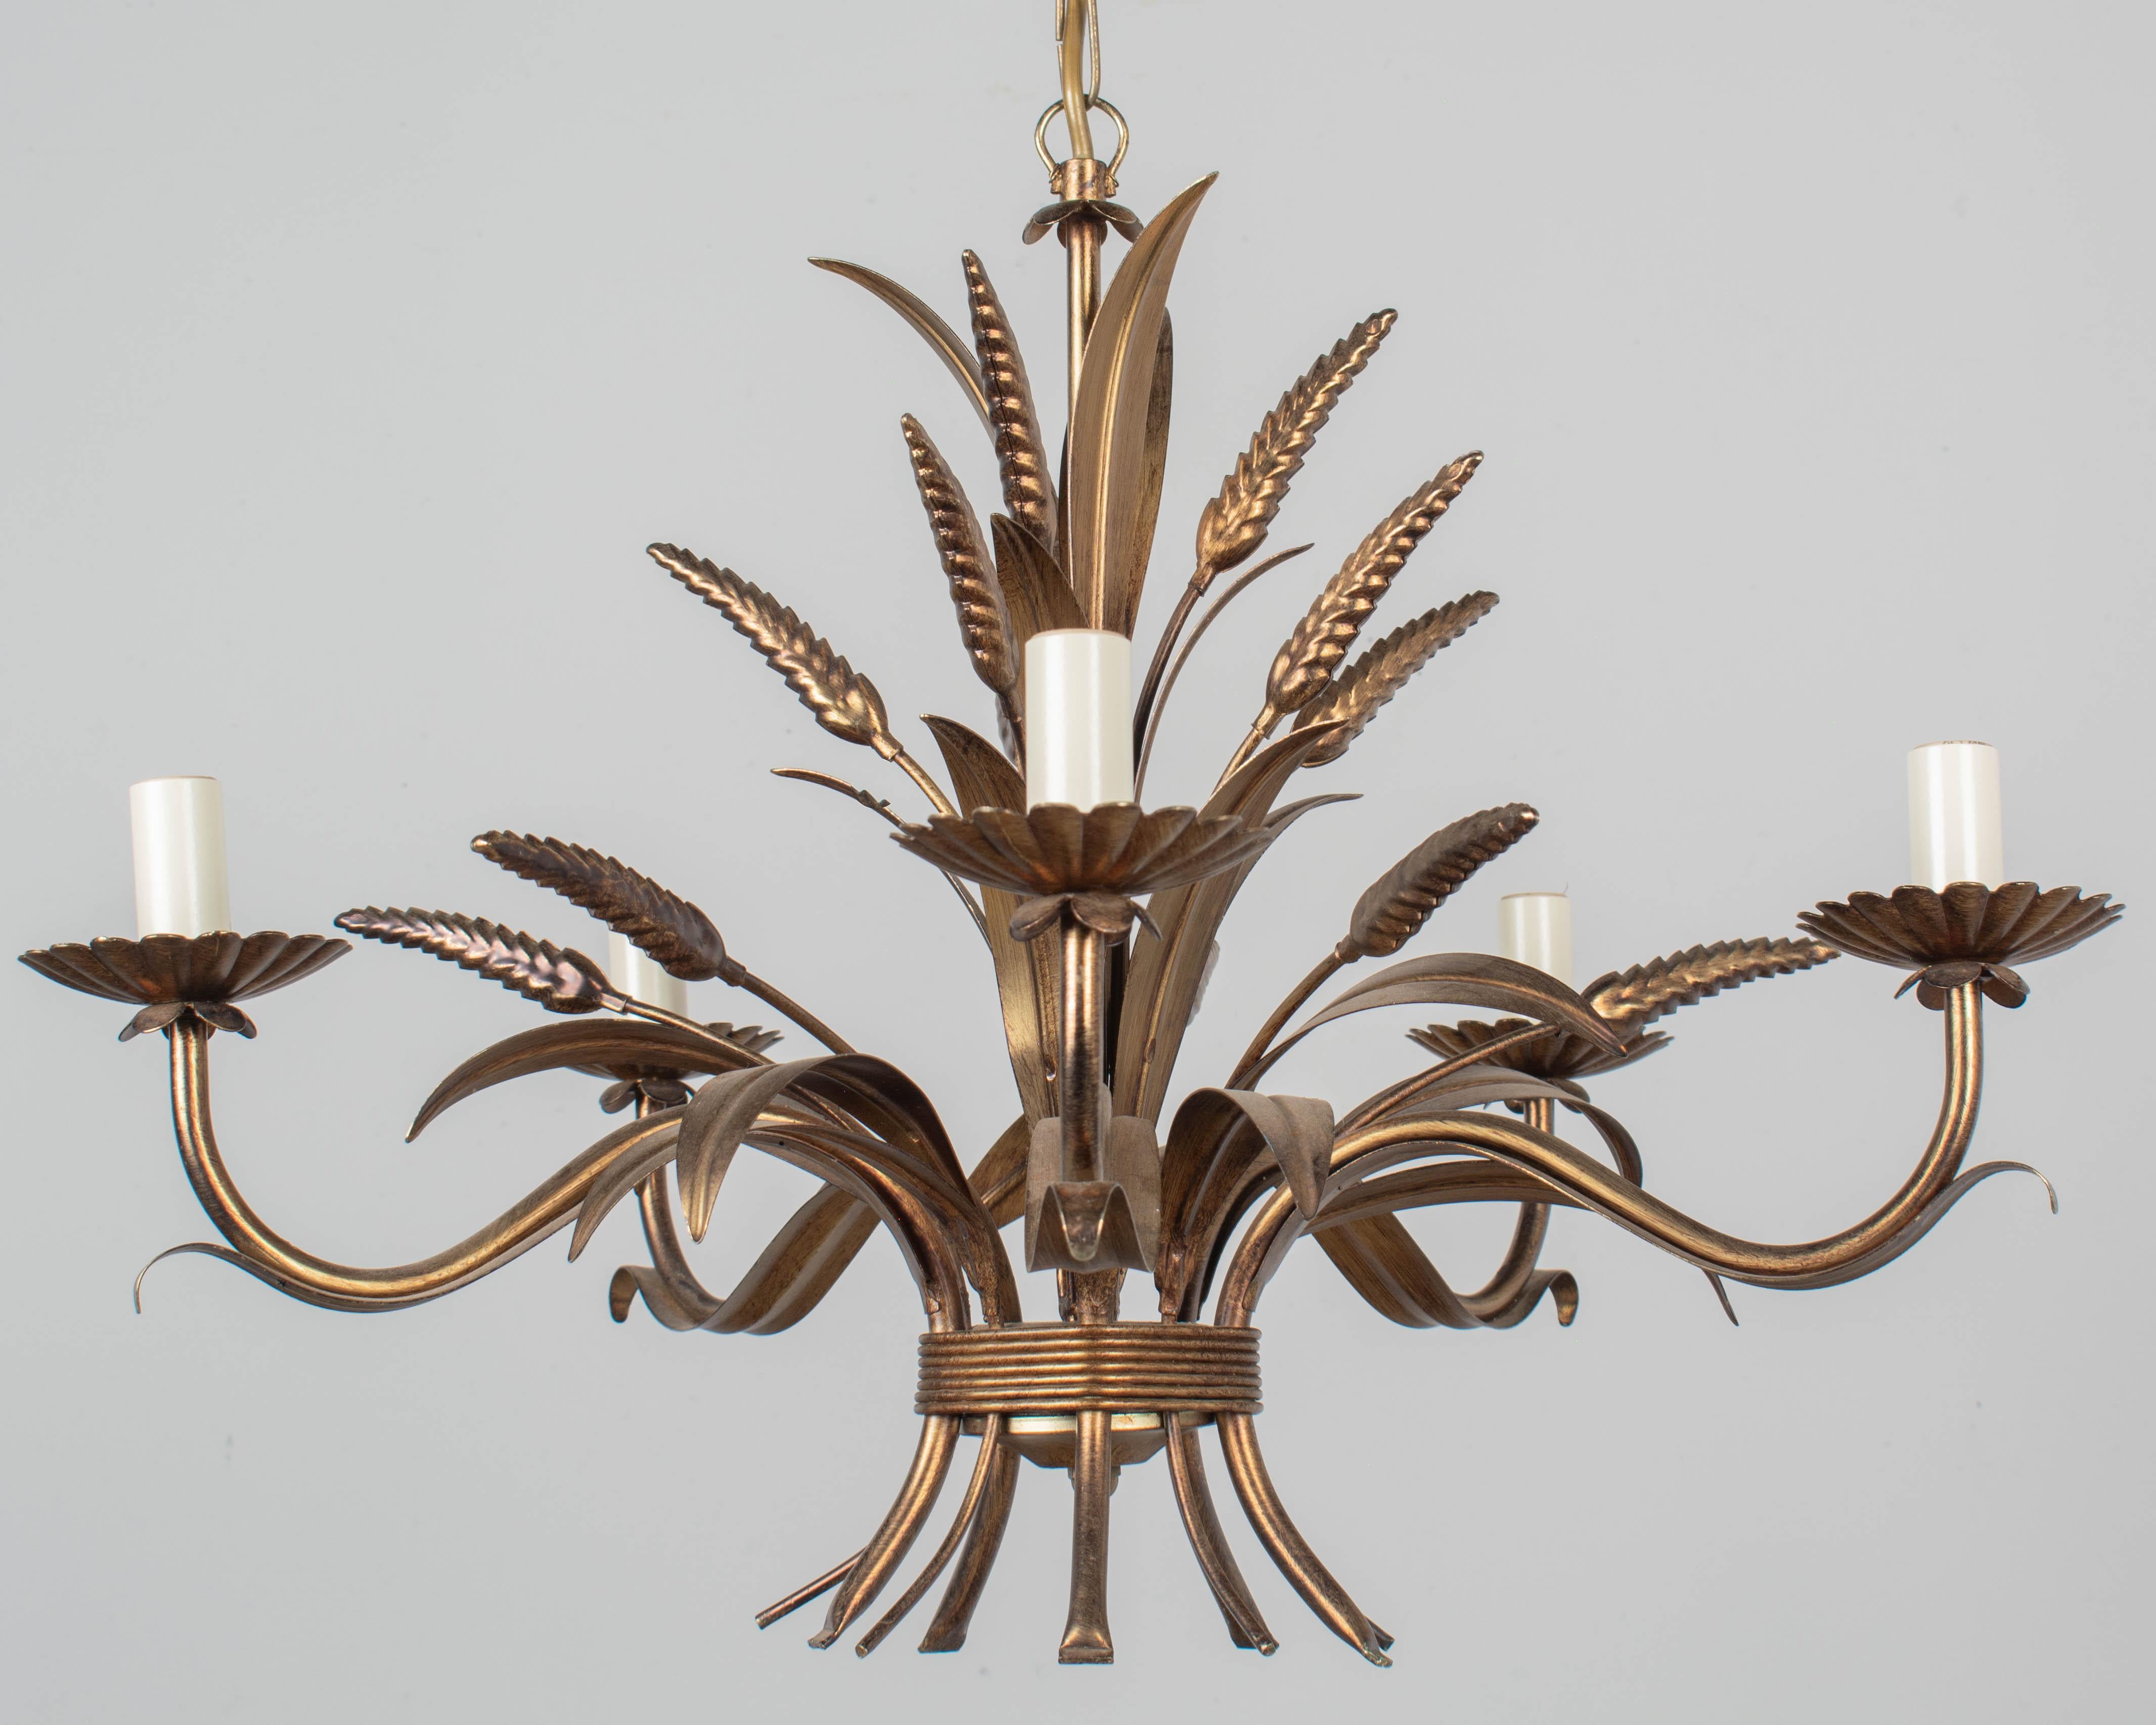 Italian Gilt Tole Sheaf of Wheat Chandelier In Good Condition For Sale In Winter Park, FL